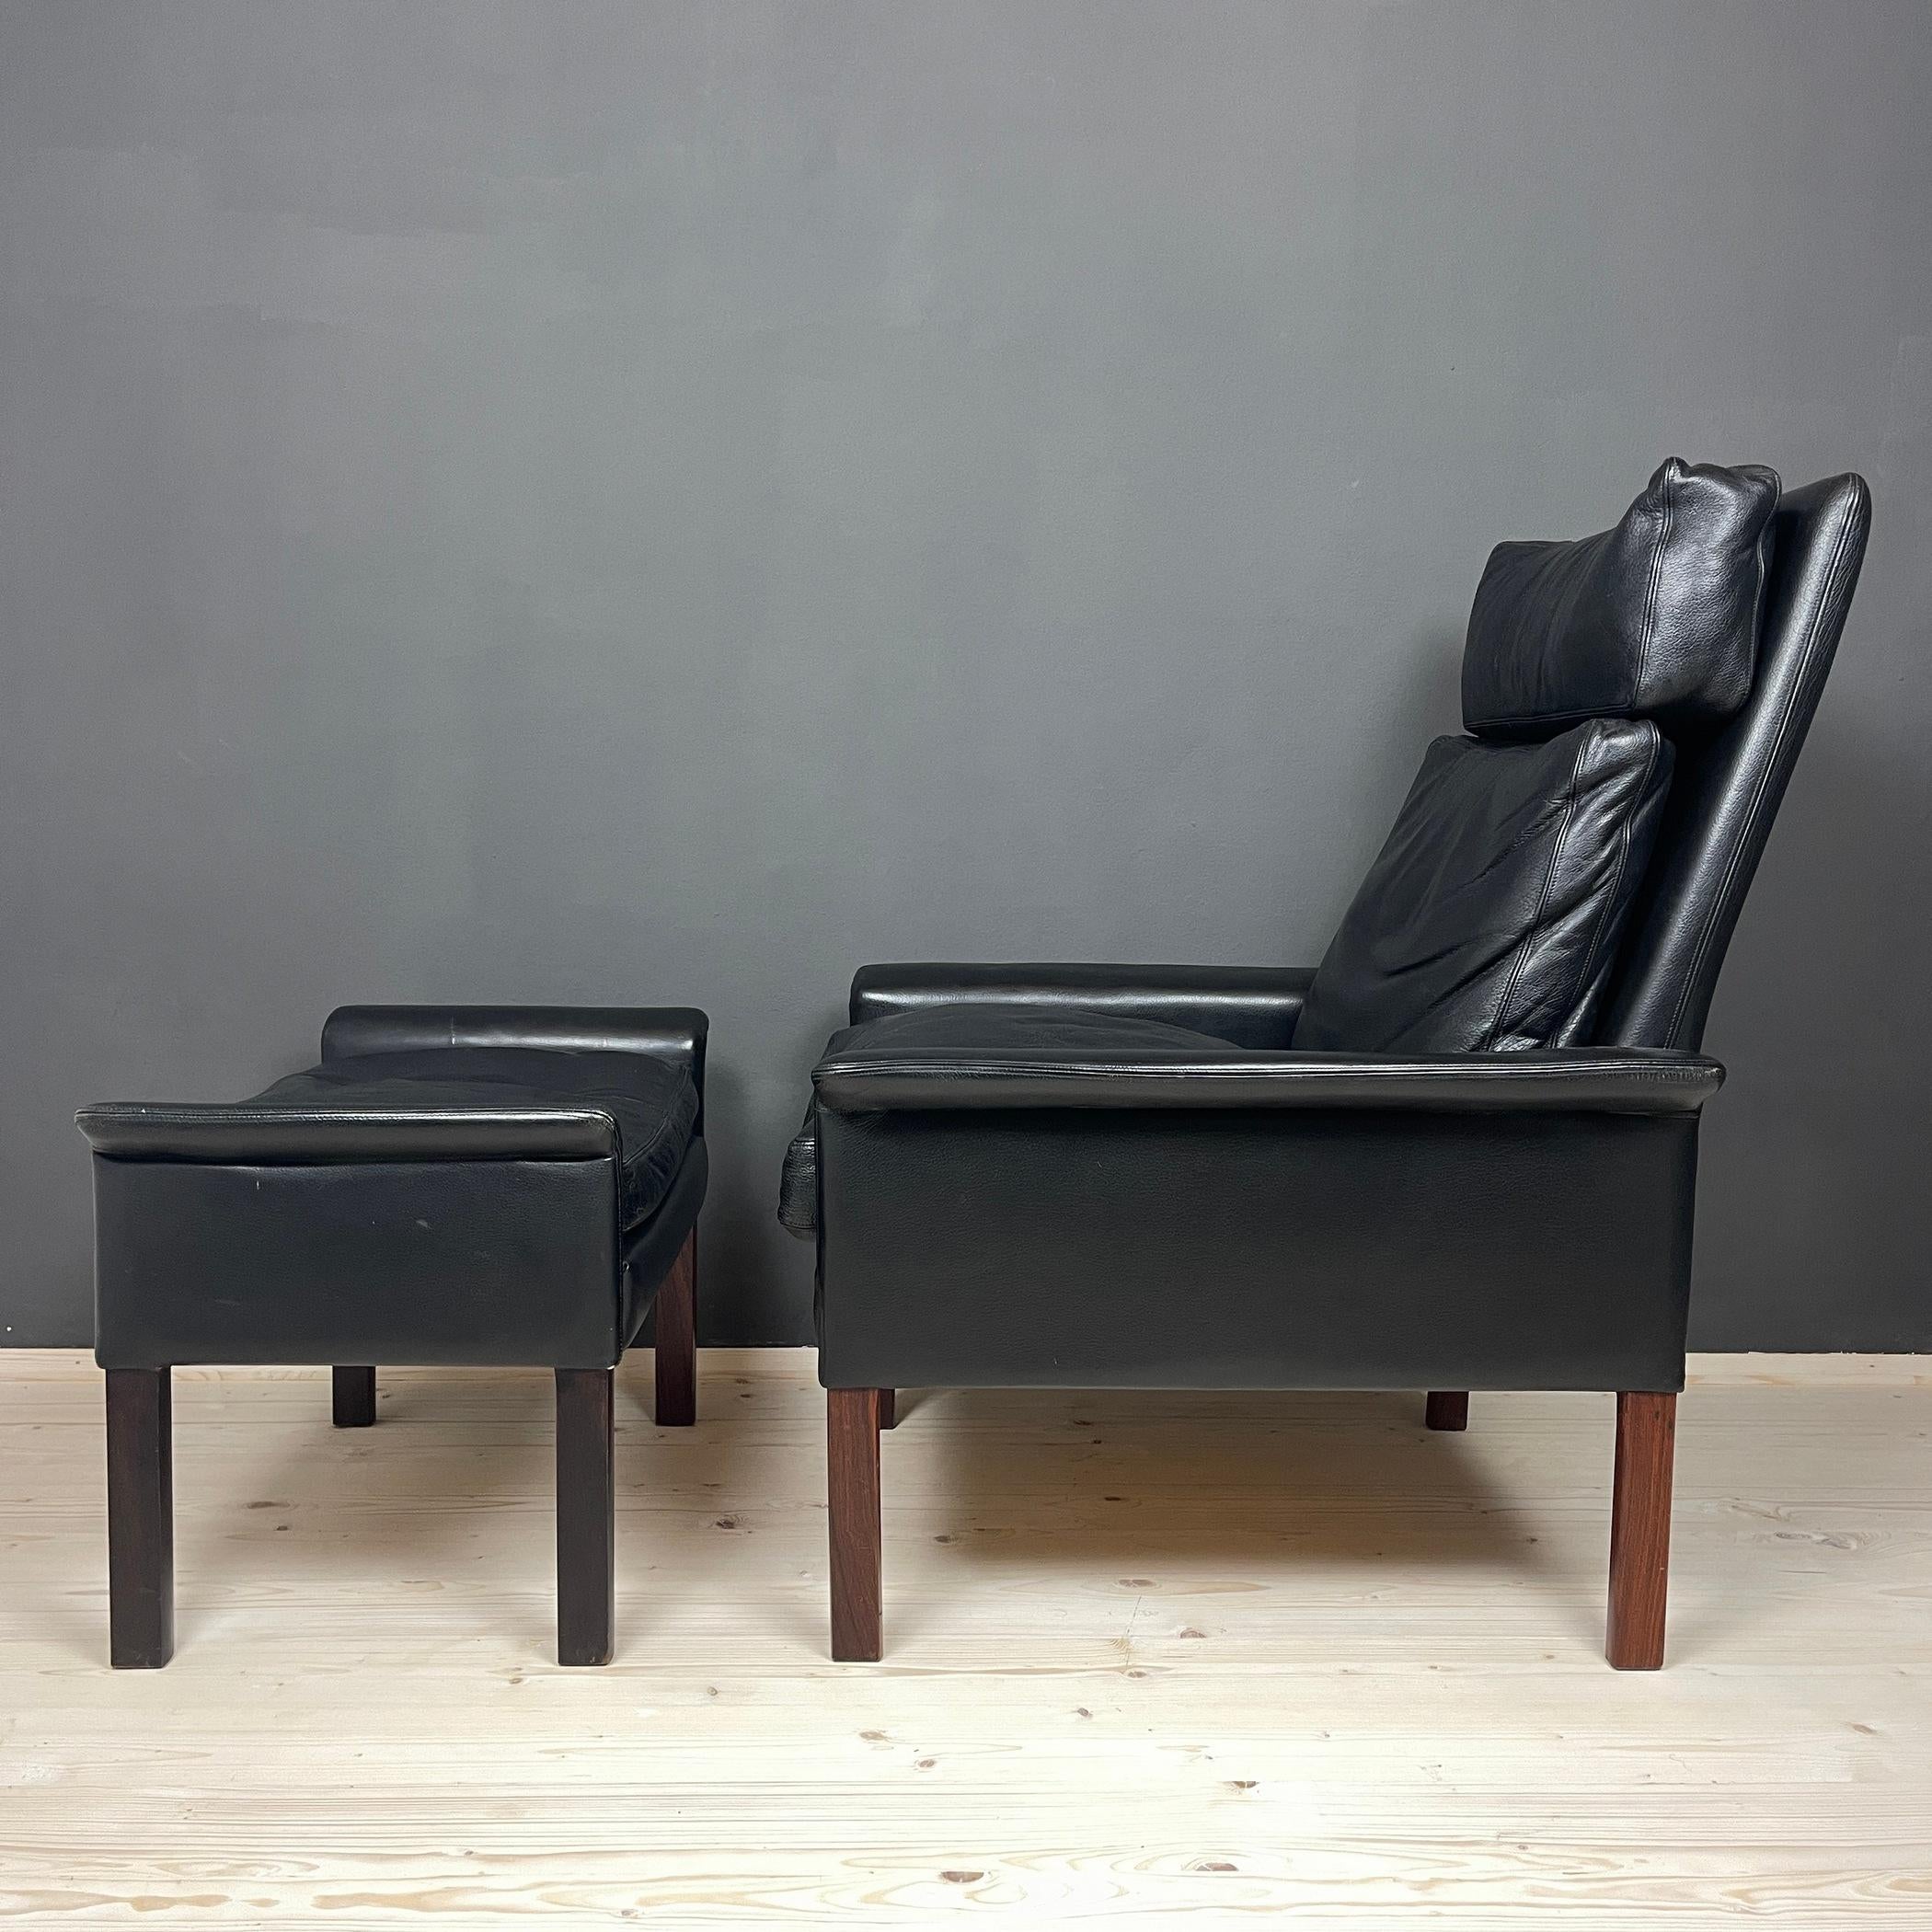 Hans Olsen's model 500 lounge chair and ottoman, which were created in Denmark for Vatne Møbler, are exquisitely weathered in black leather and mahogany. Flared armrests, crisp lines, and a charming low profile posture define this contemporary